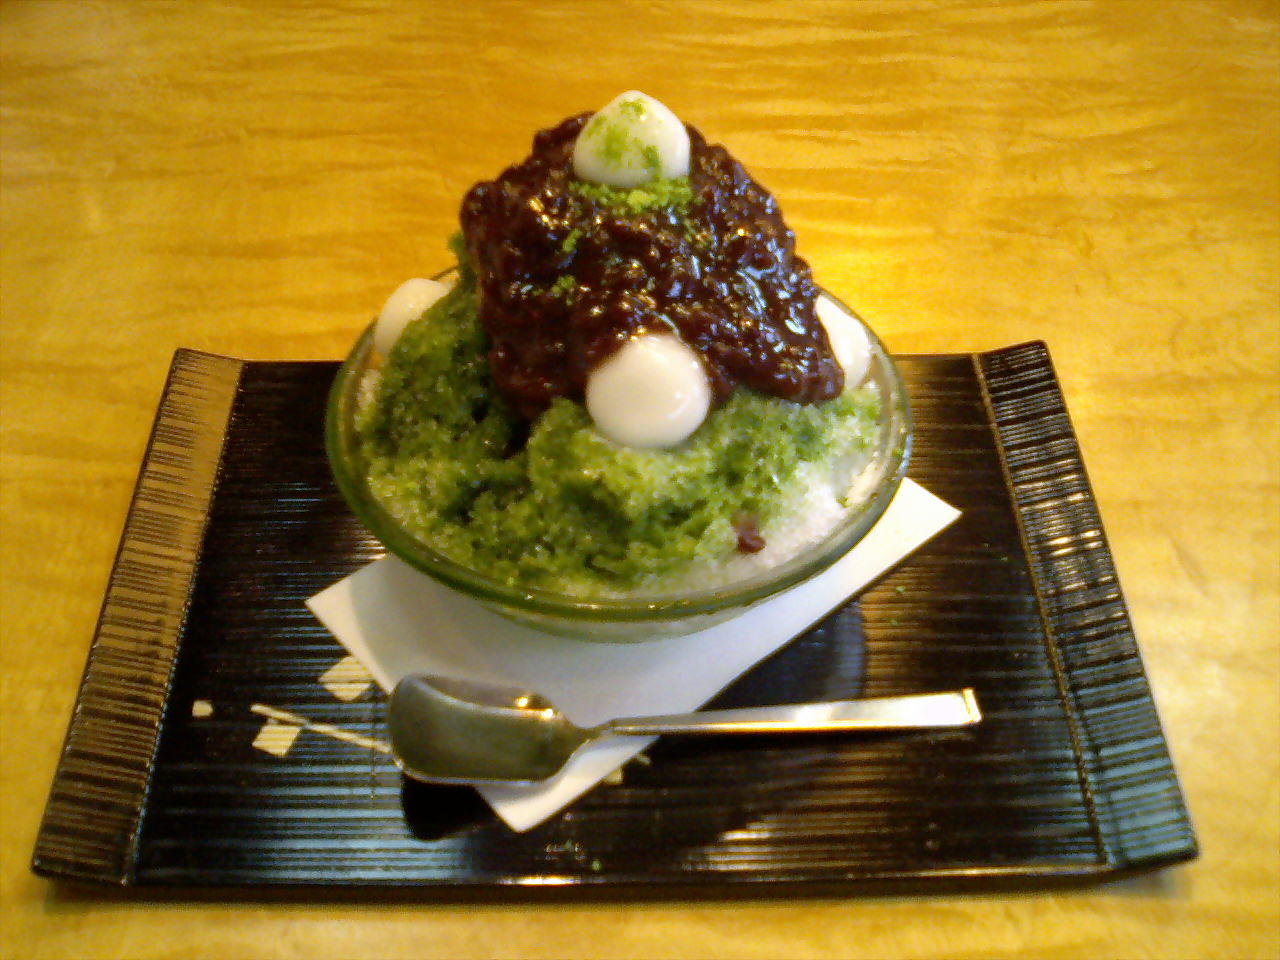 Image search results for "shaved ice Uji Kintoki"